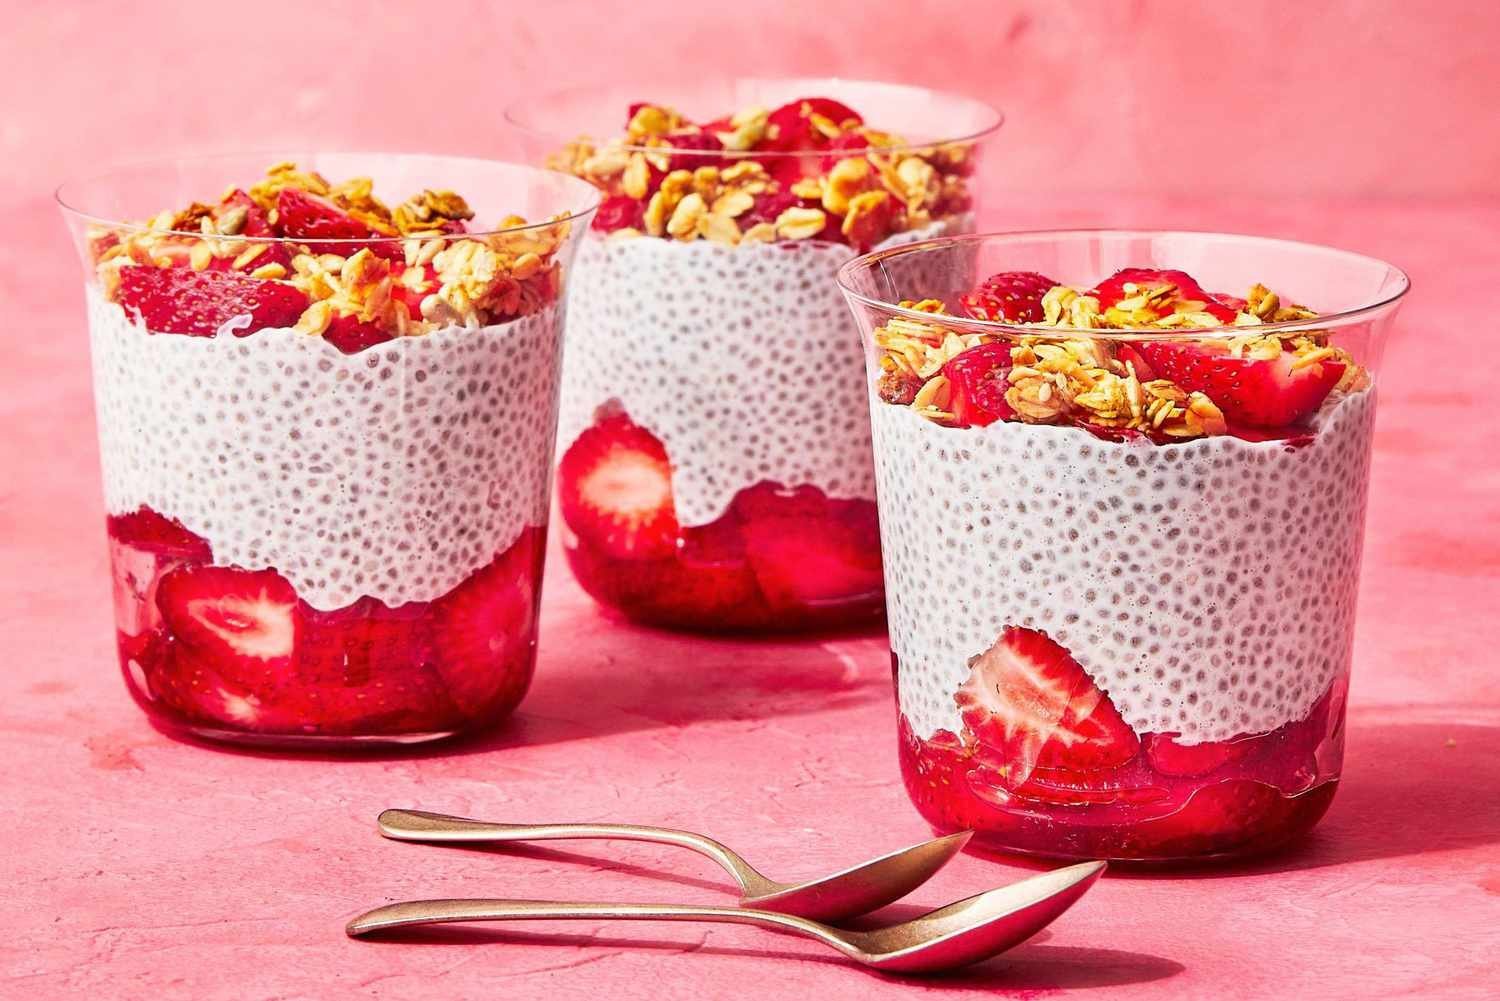 12 Superfood Breakfast Recipes That Will Start Your Day Off Right